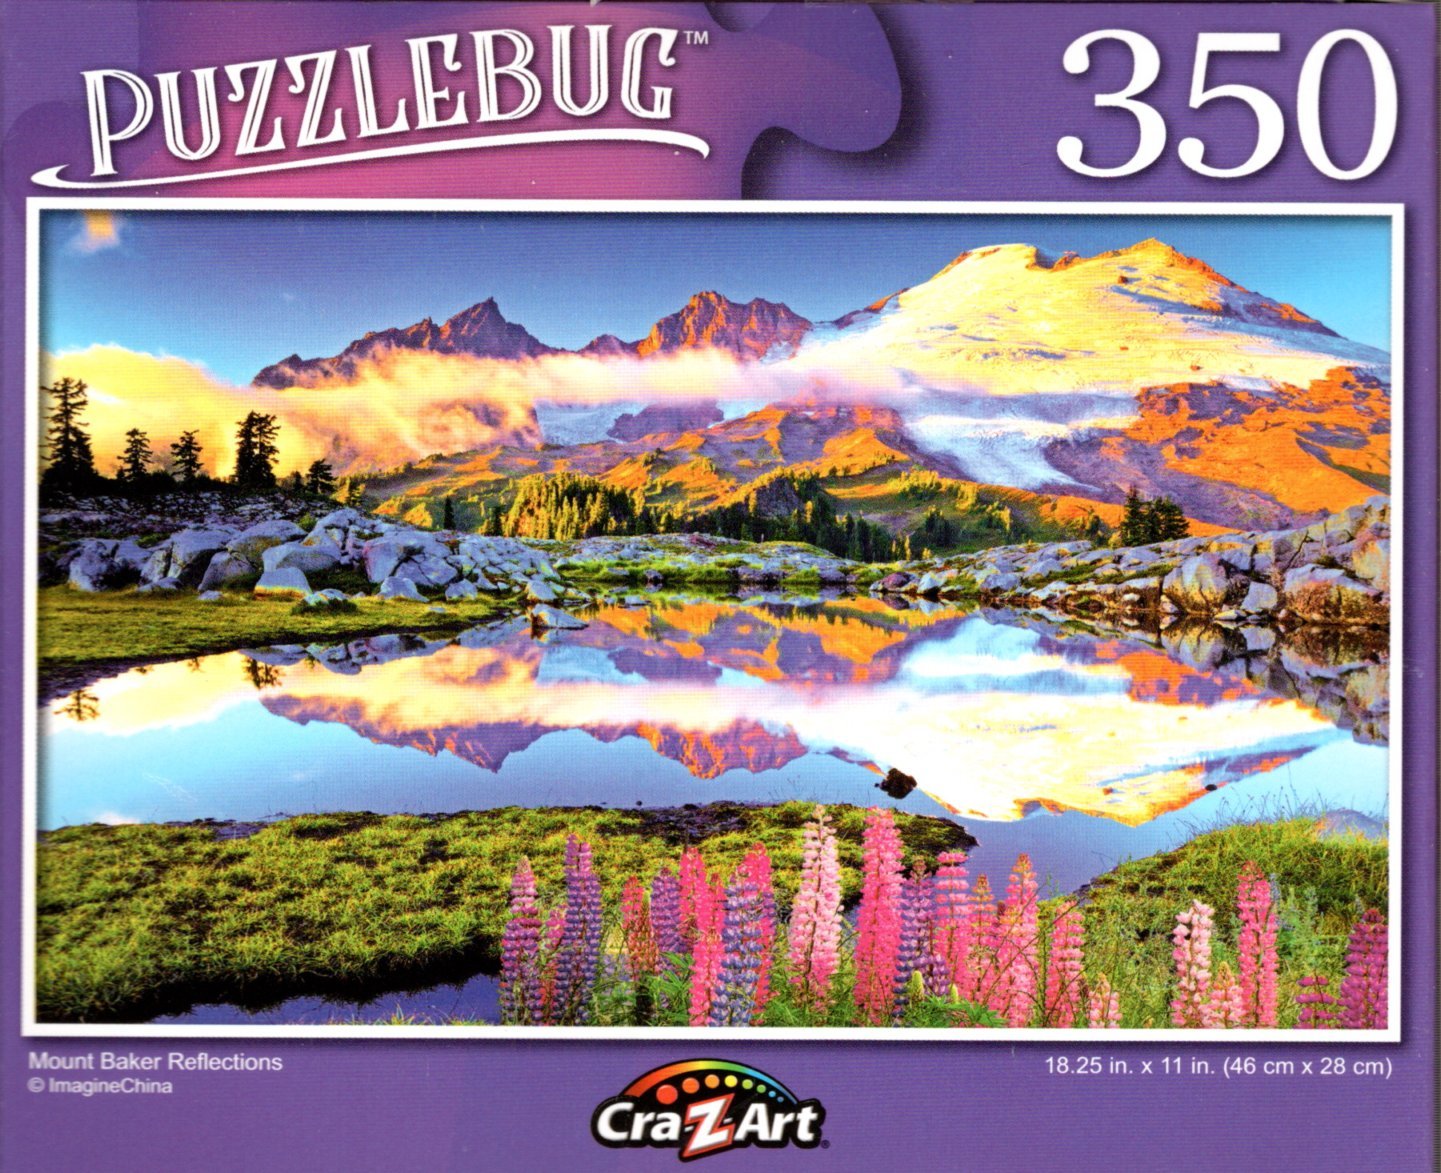 Mount Baker Reflections - 350 Pieces Jigsaw Puzzle